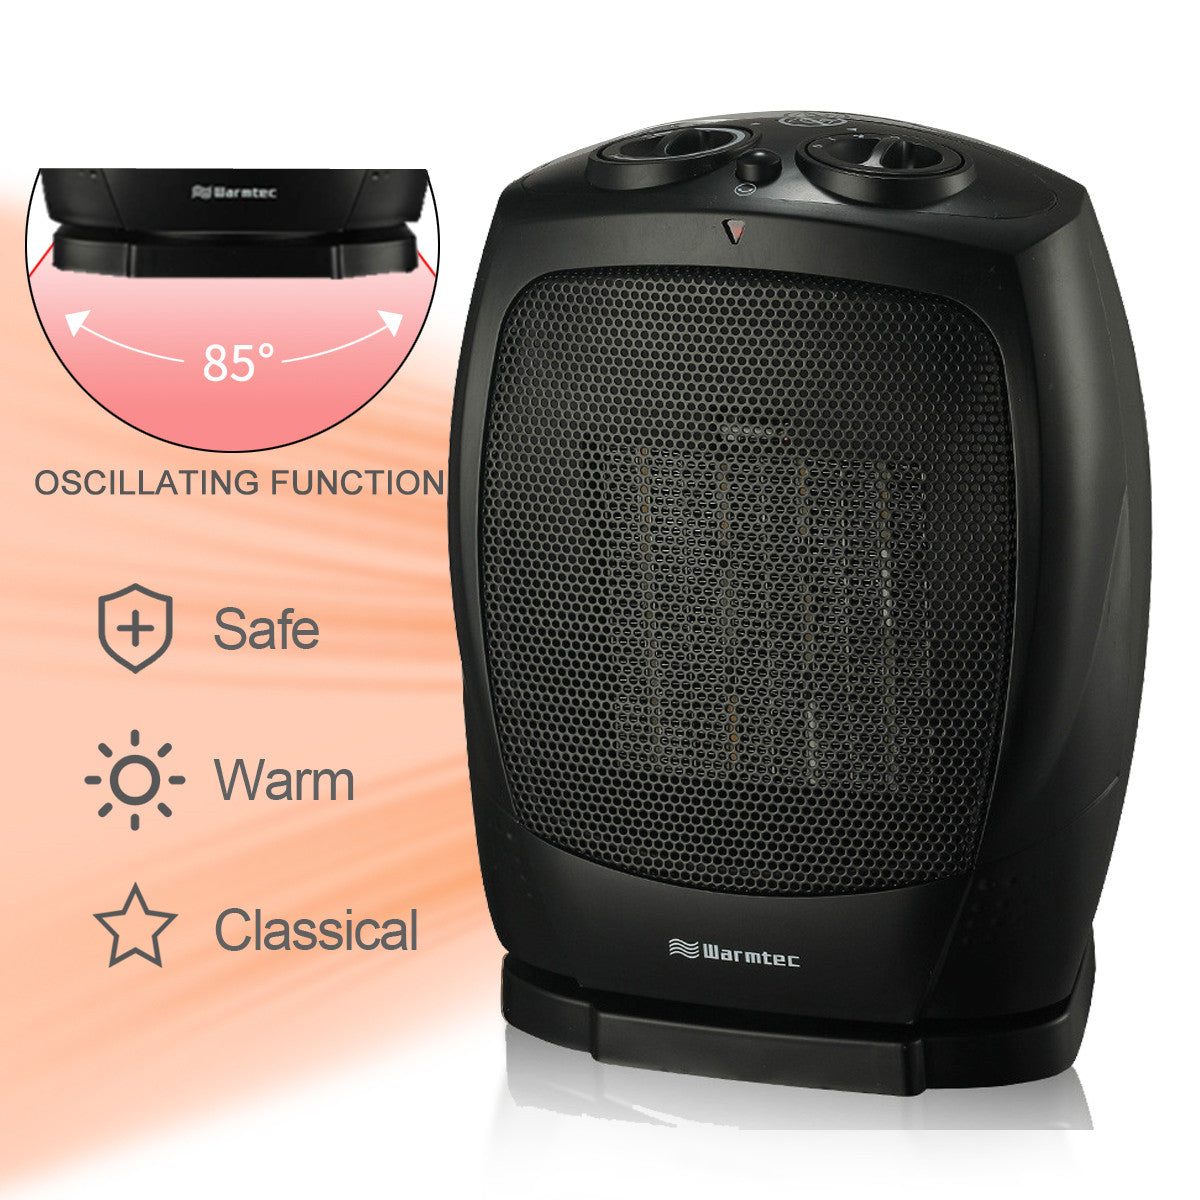 portable heater with thermostat control